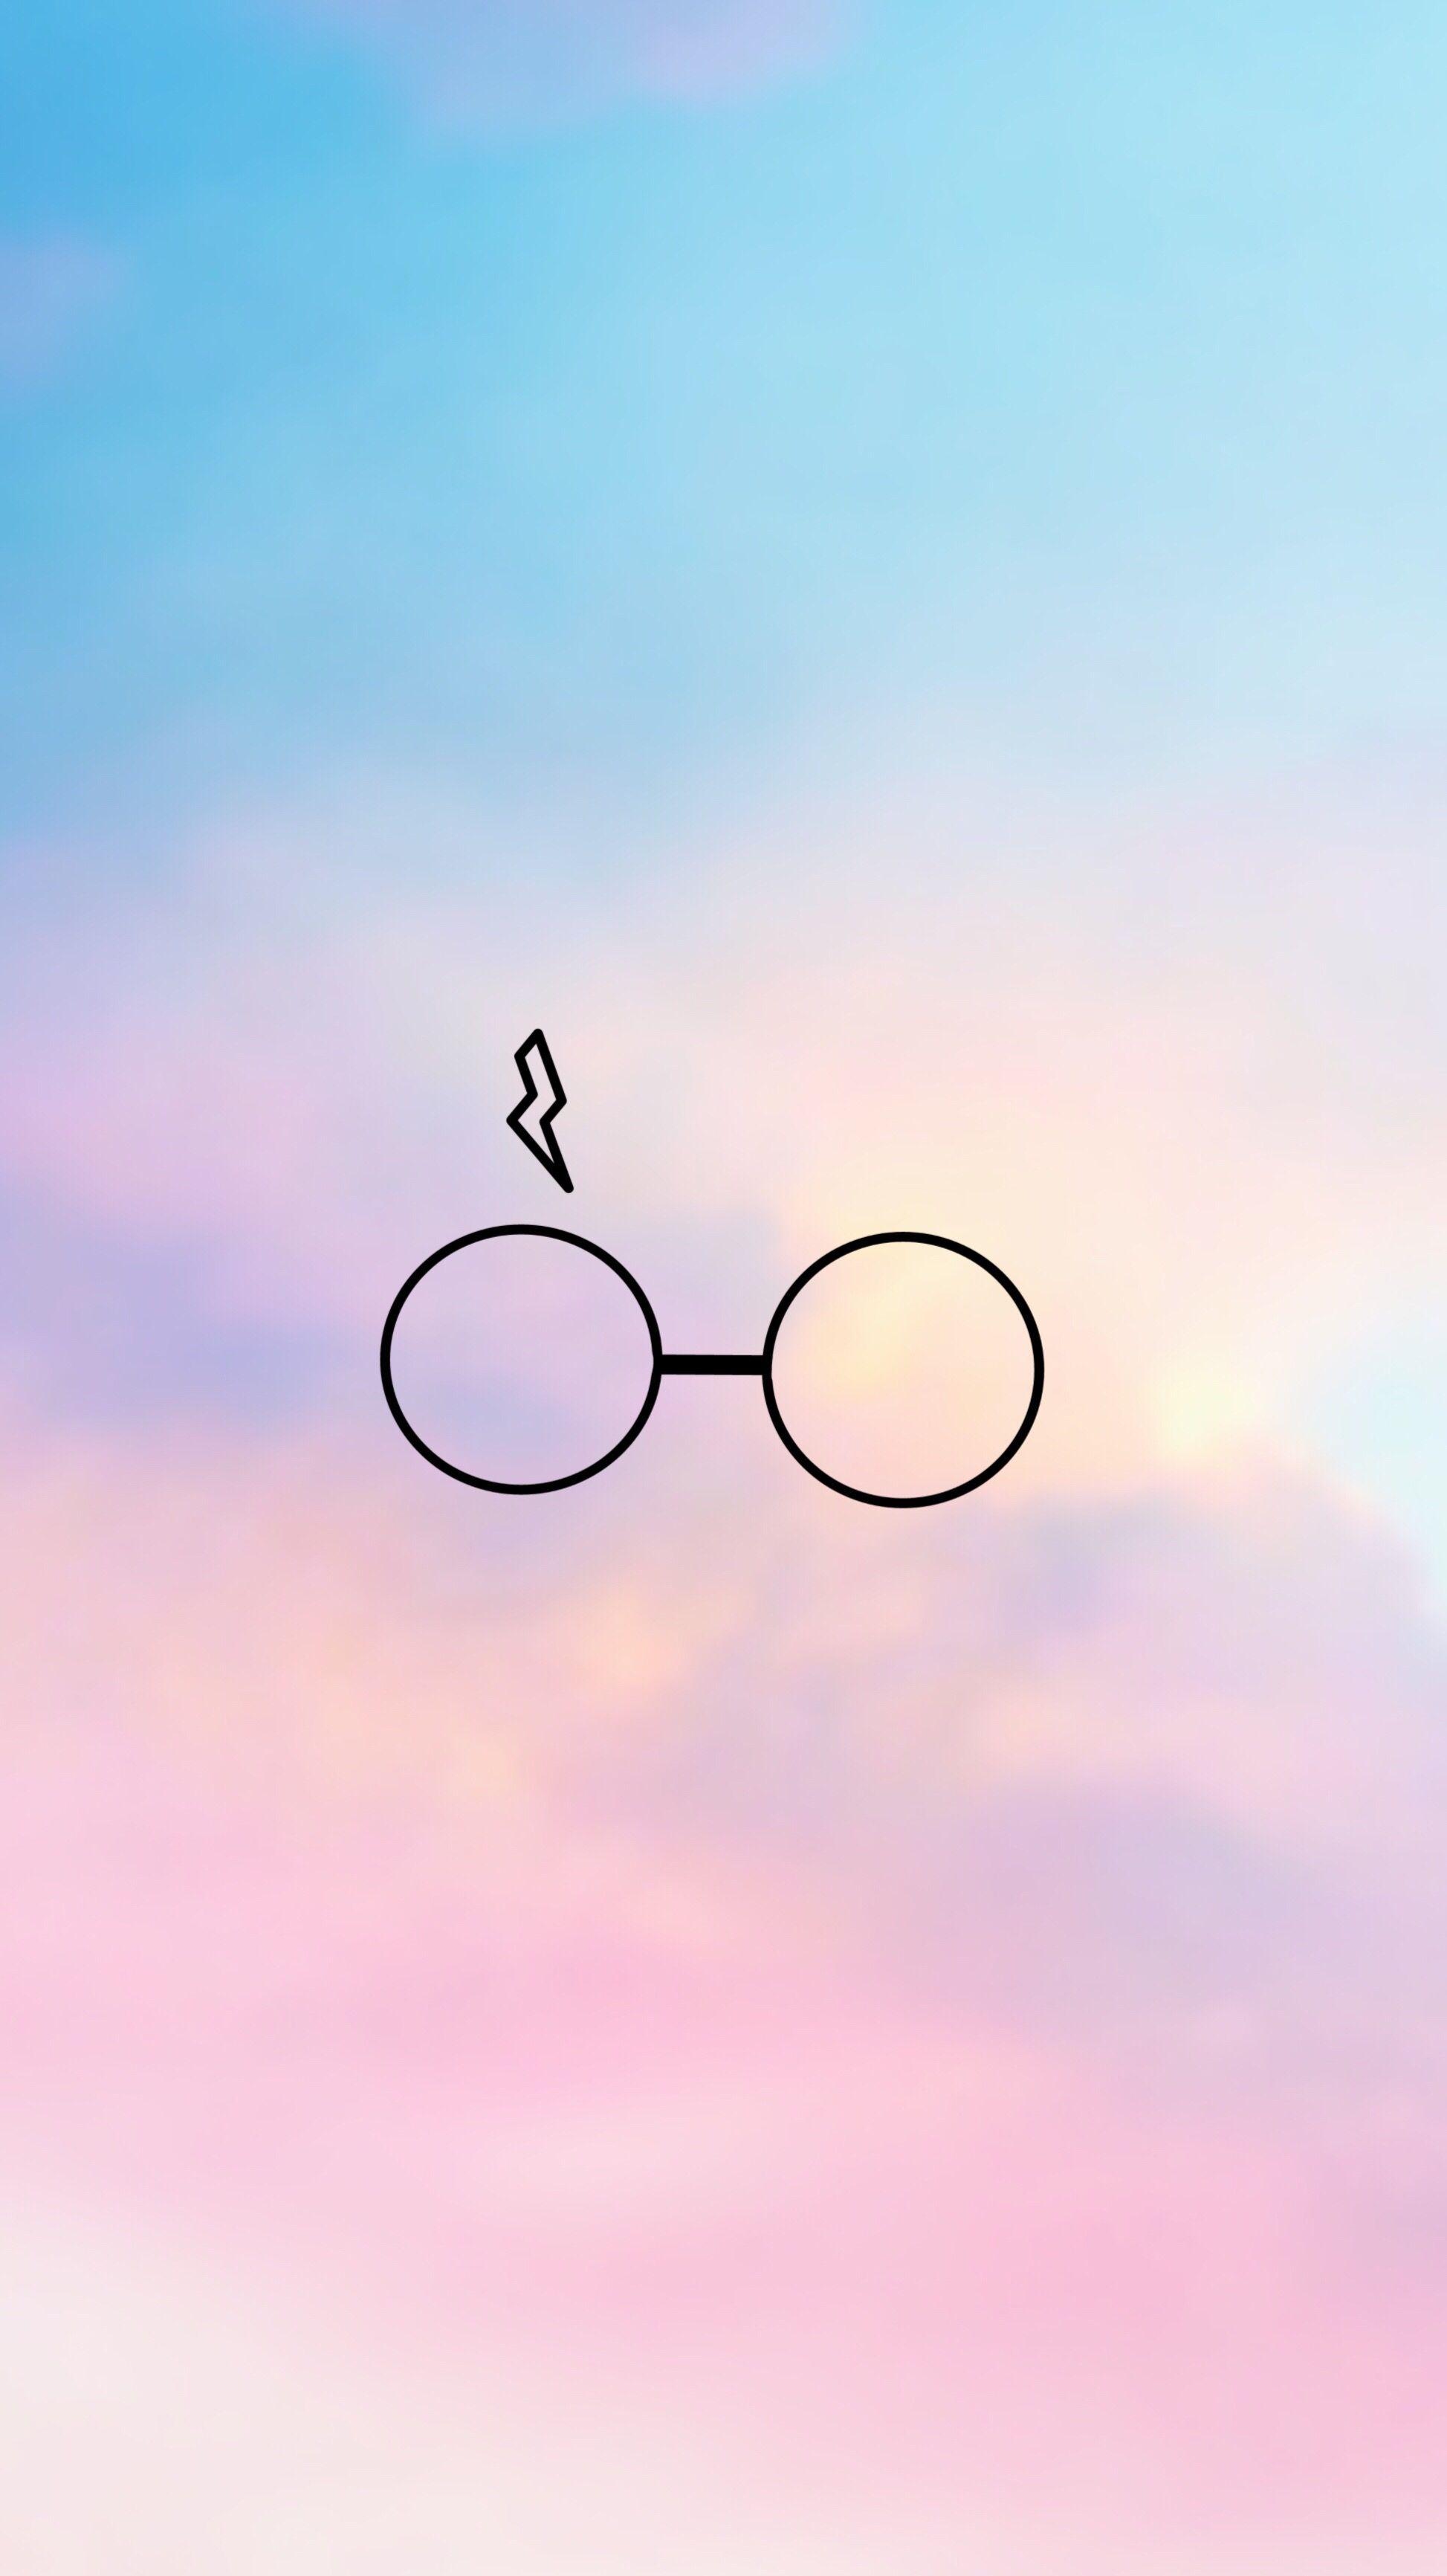 Muggle harry lock screen muggle ombre muggle quote ombre potter HD  phone wallpaper  Peakpx